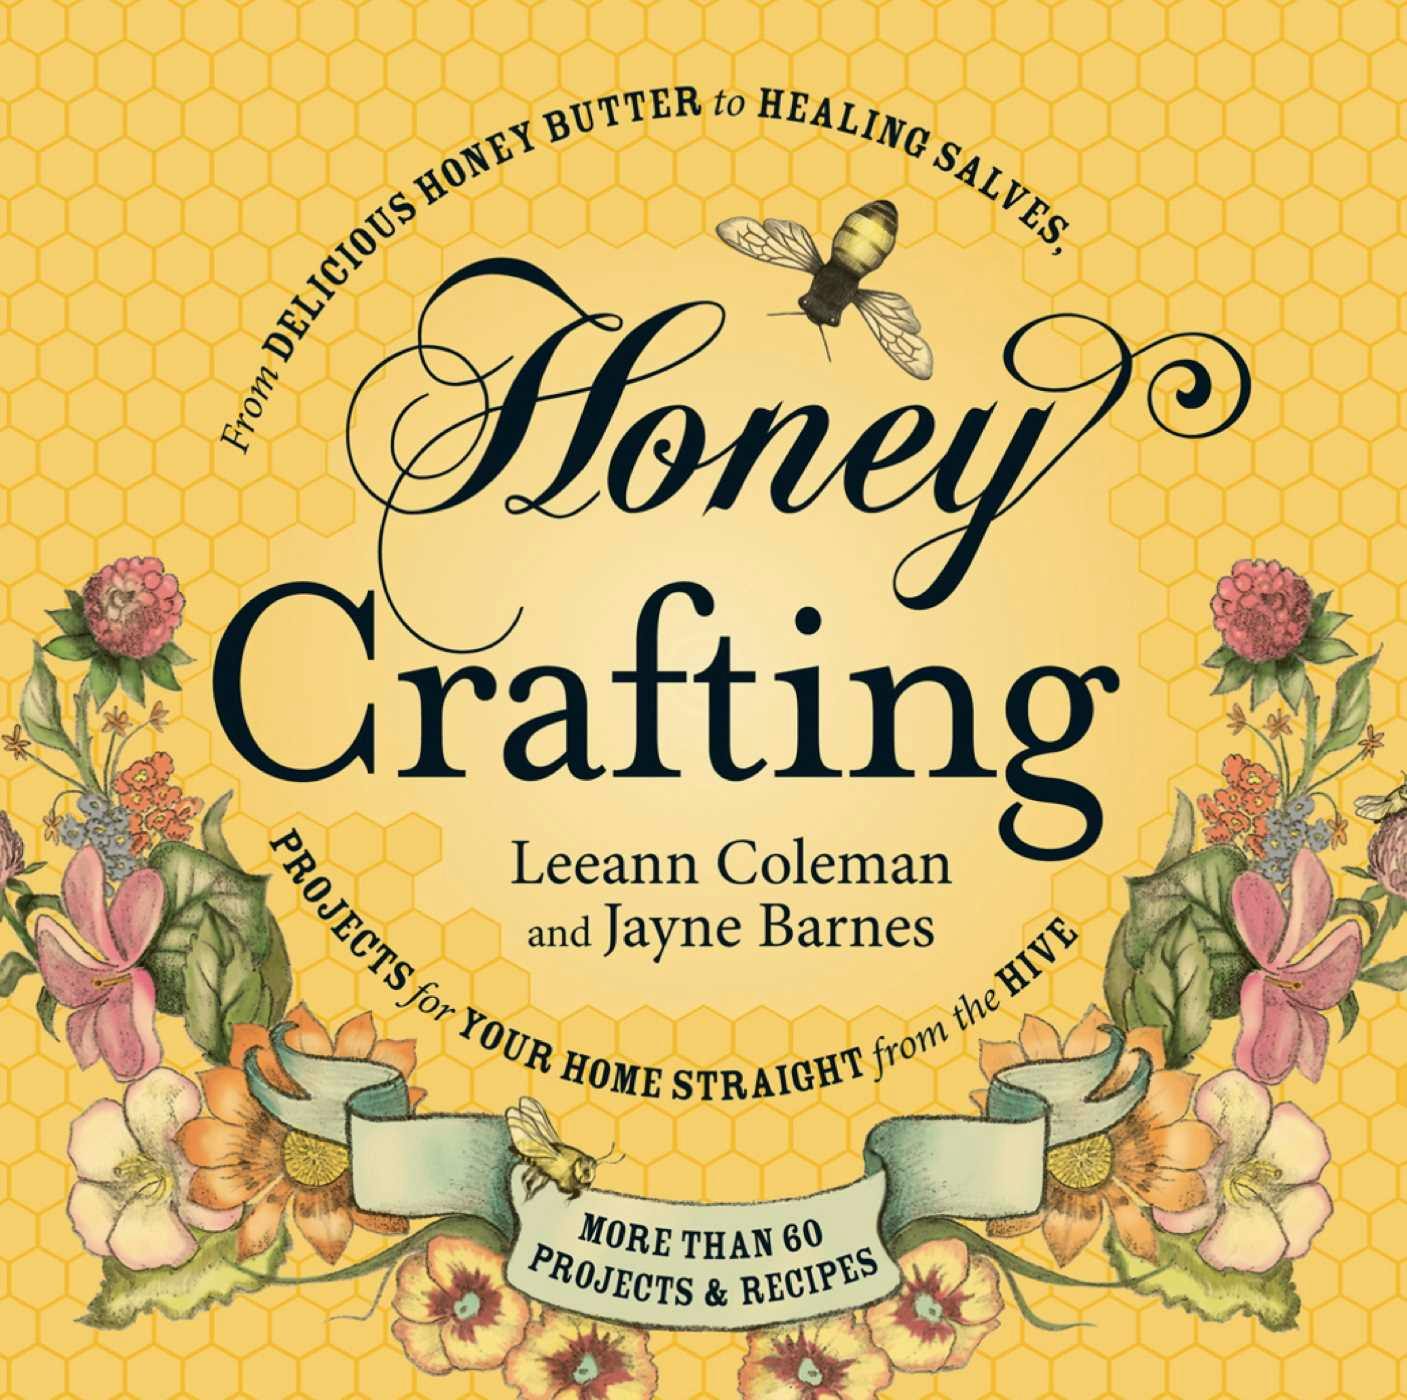 Honey Crafting: From Delicious Honey Butter to Healing Salves, Projects for Your Home Straight from the Hive - Caneen Canning, Leeann Coleman, Jayne Barnes